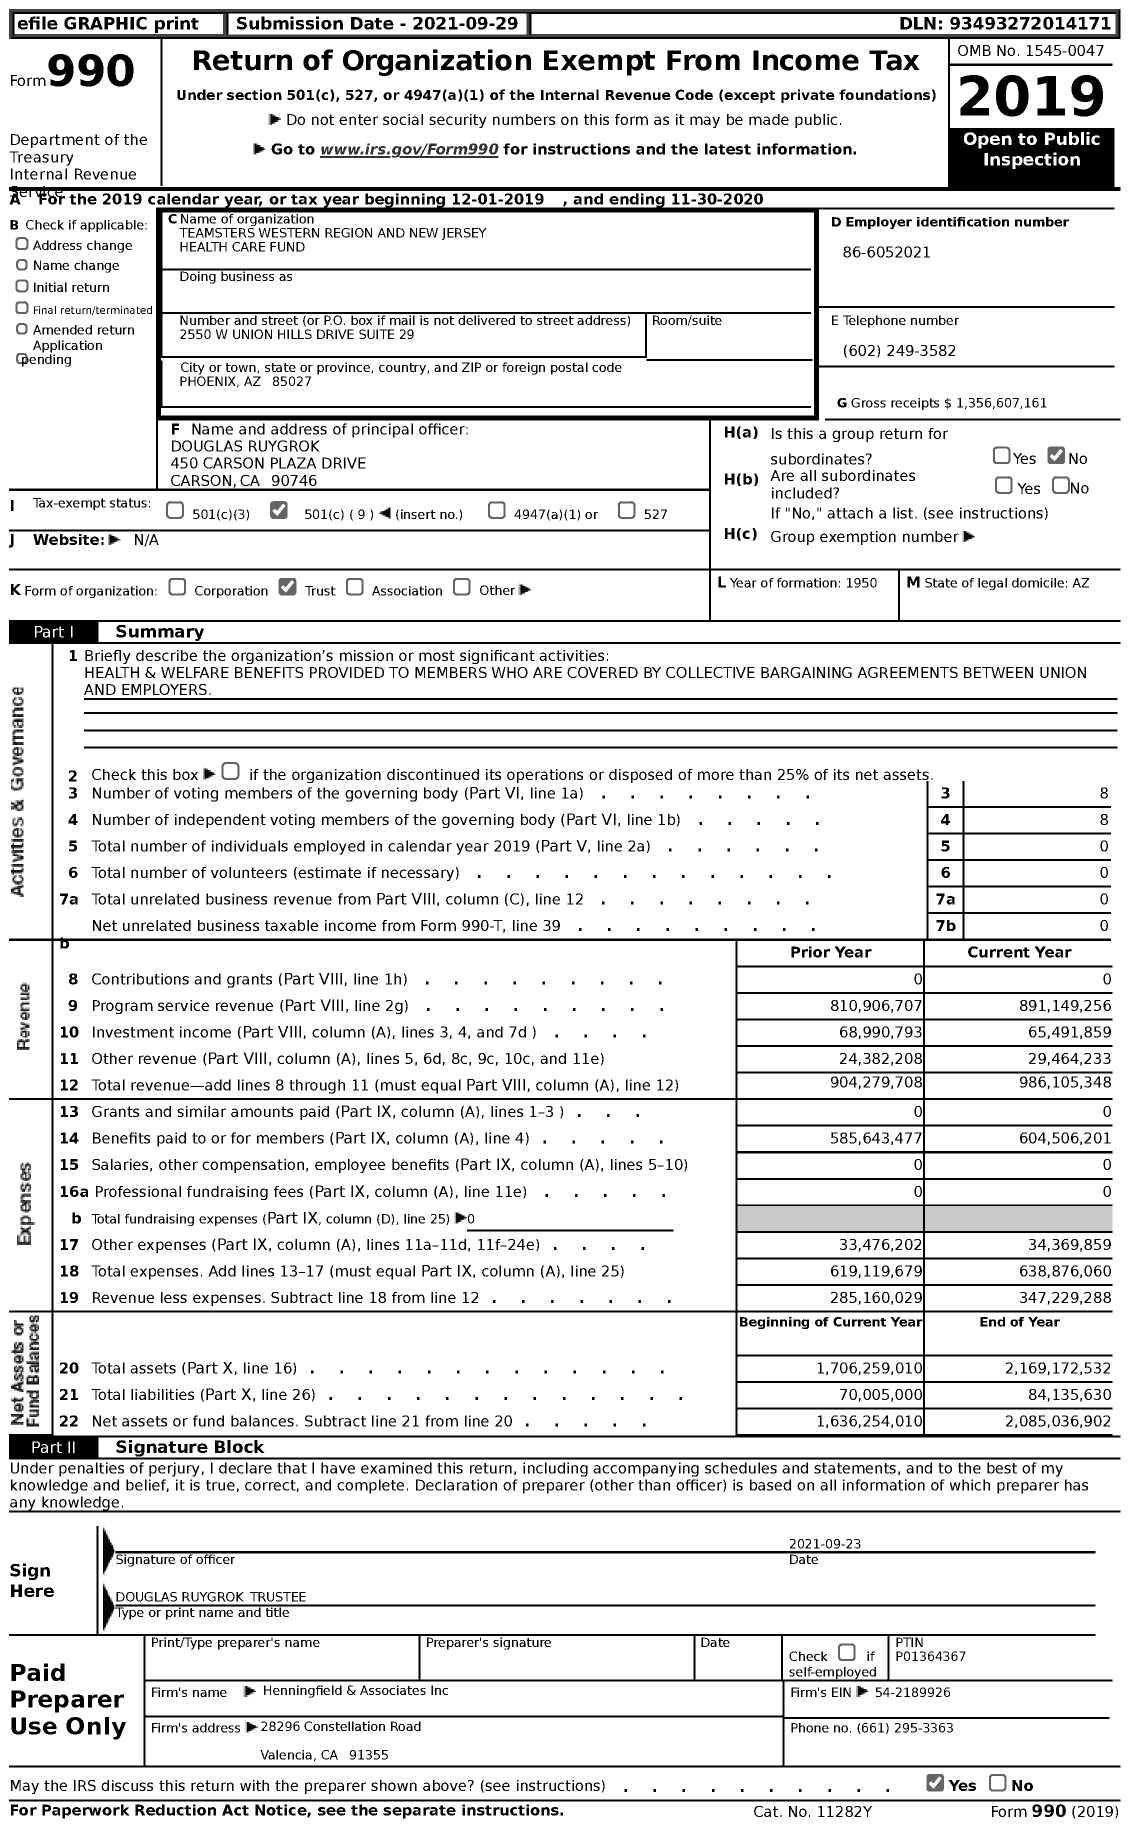 Image of first page of 2019 Form 990 for Teamsters Western Region and New Jersey Health Care Fund